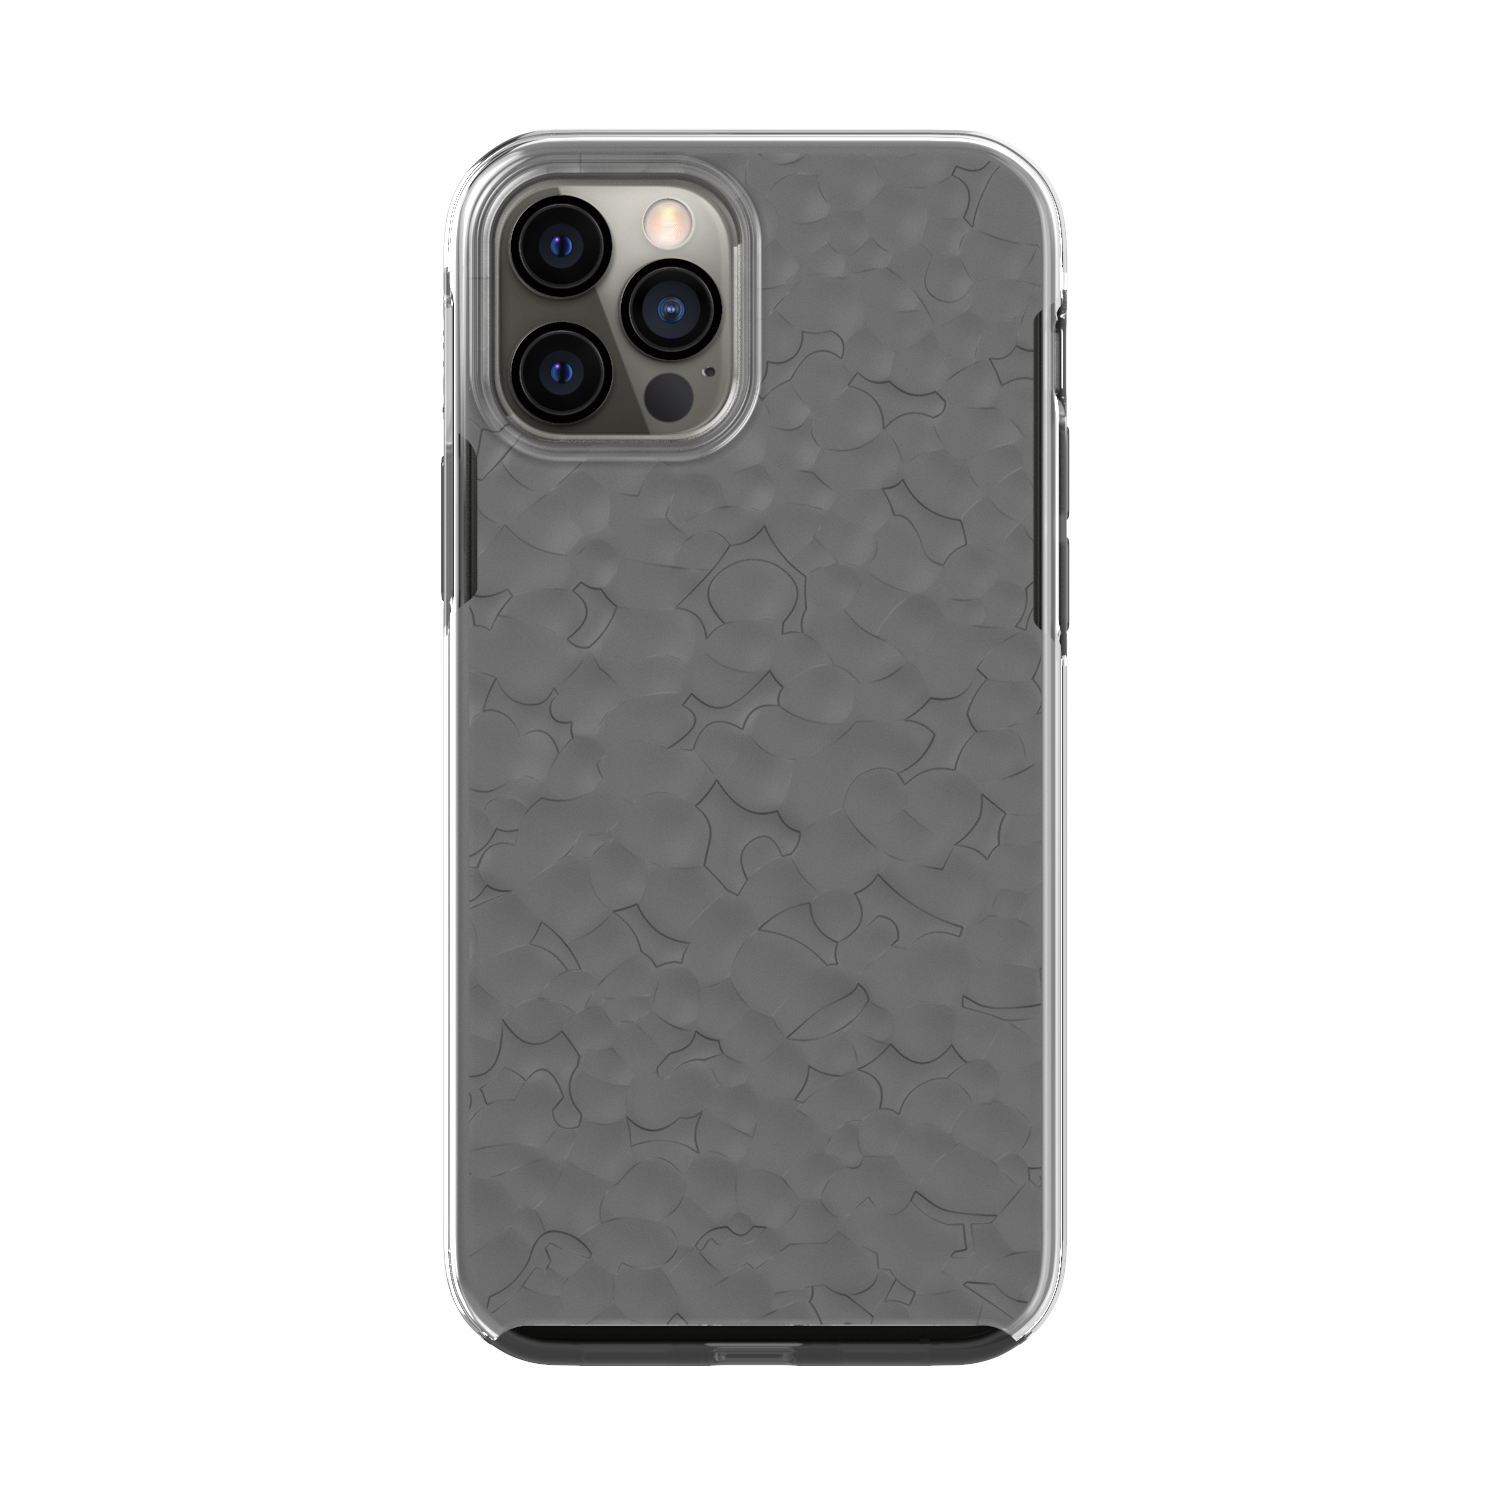 Sentri Charcoal for iPhone 12 and 12 Pro